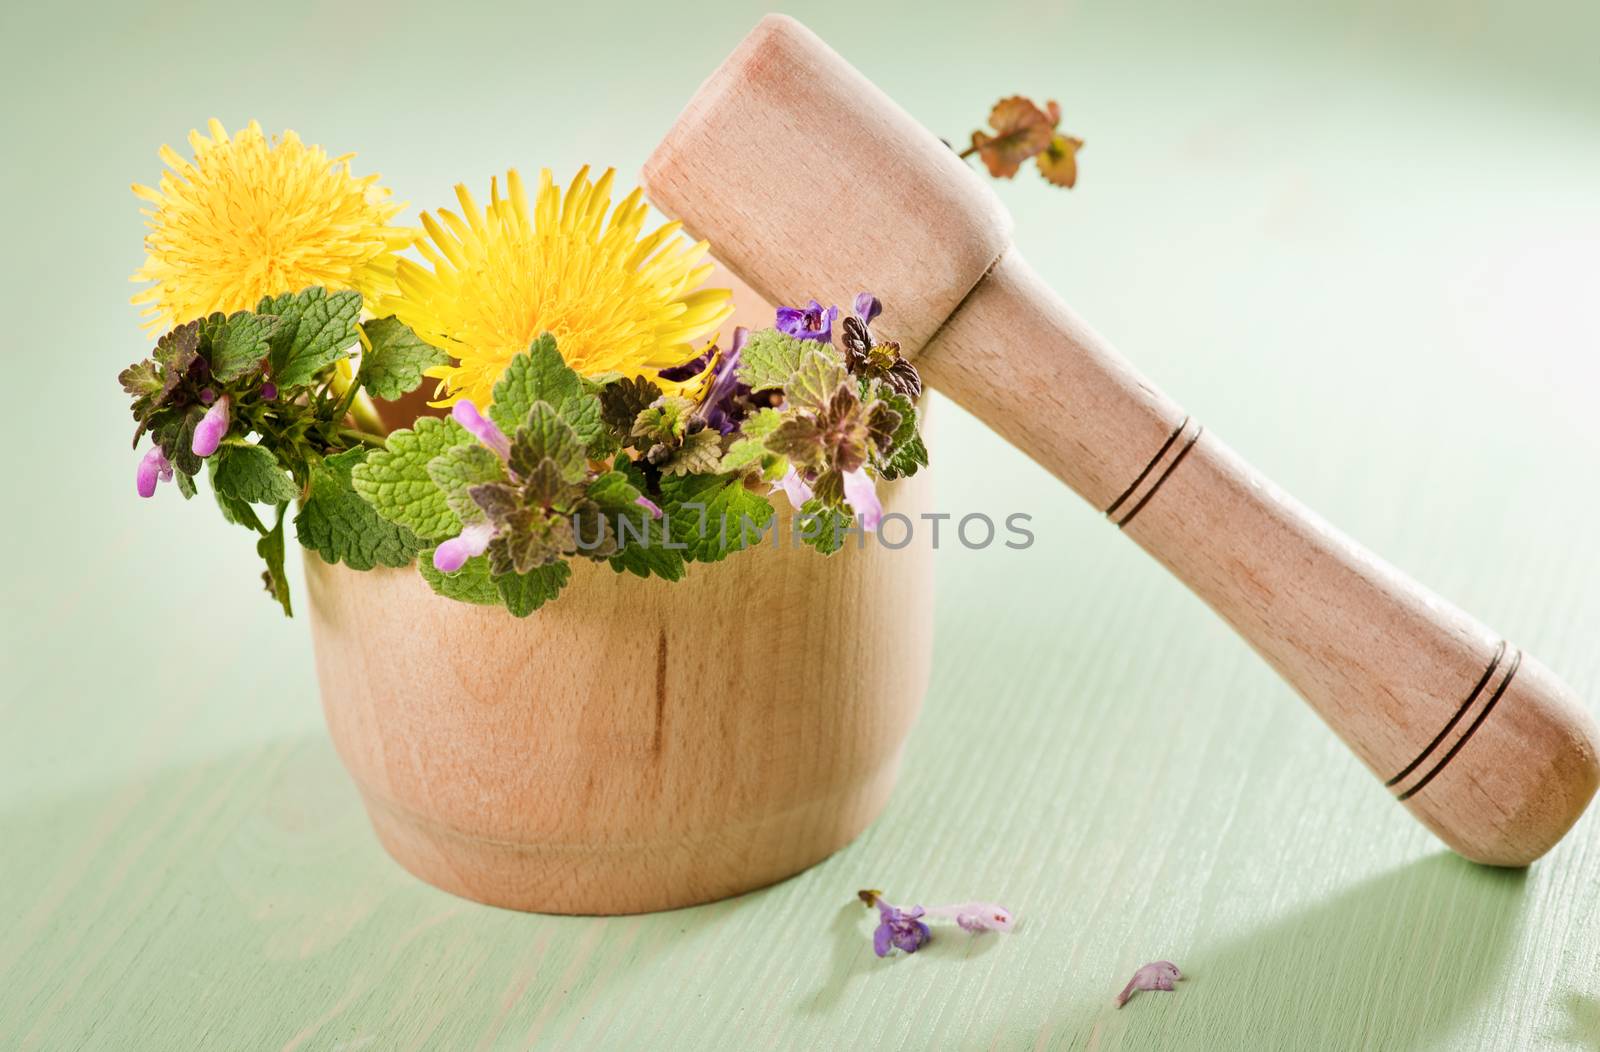 Fresh herbs and dandelions in a wooden mortar on a mint wooden table 